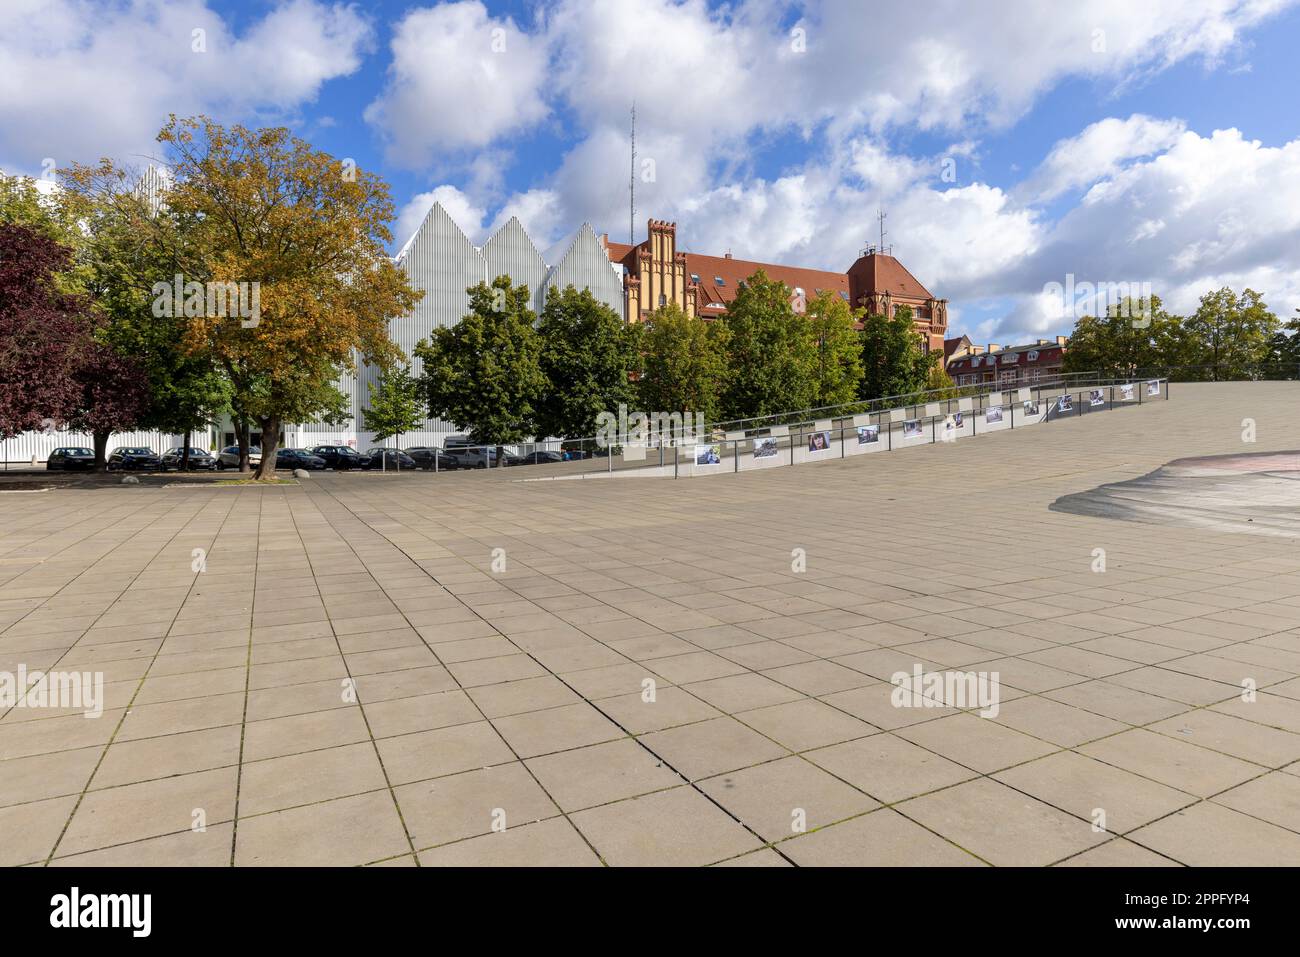 View of Solidarity Square. In the background Szczecin Philharmonic and the Police Headquarters, Szczecin, Poland Stock Photo